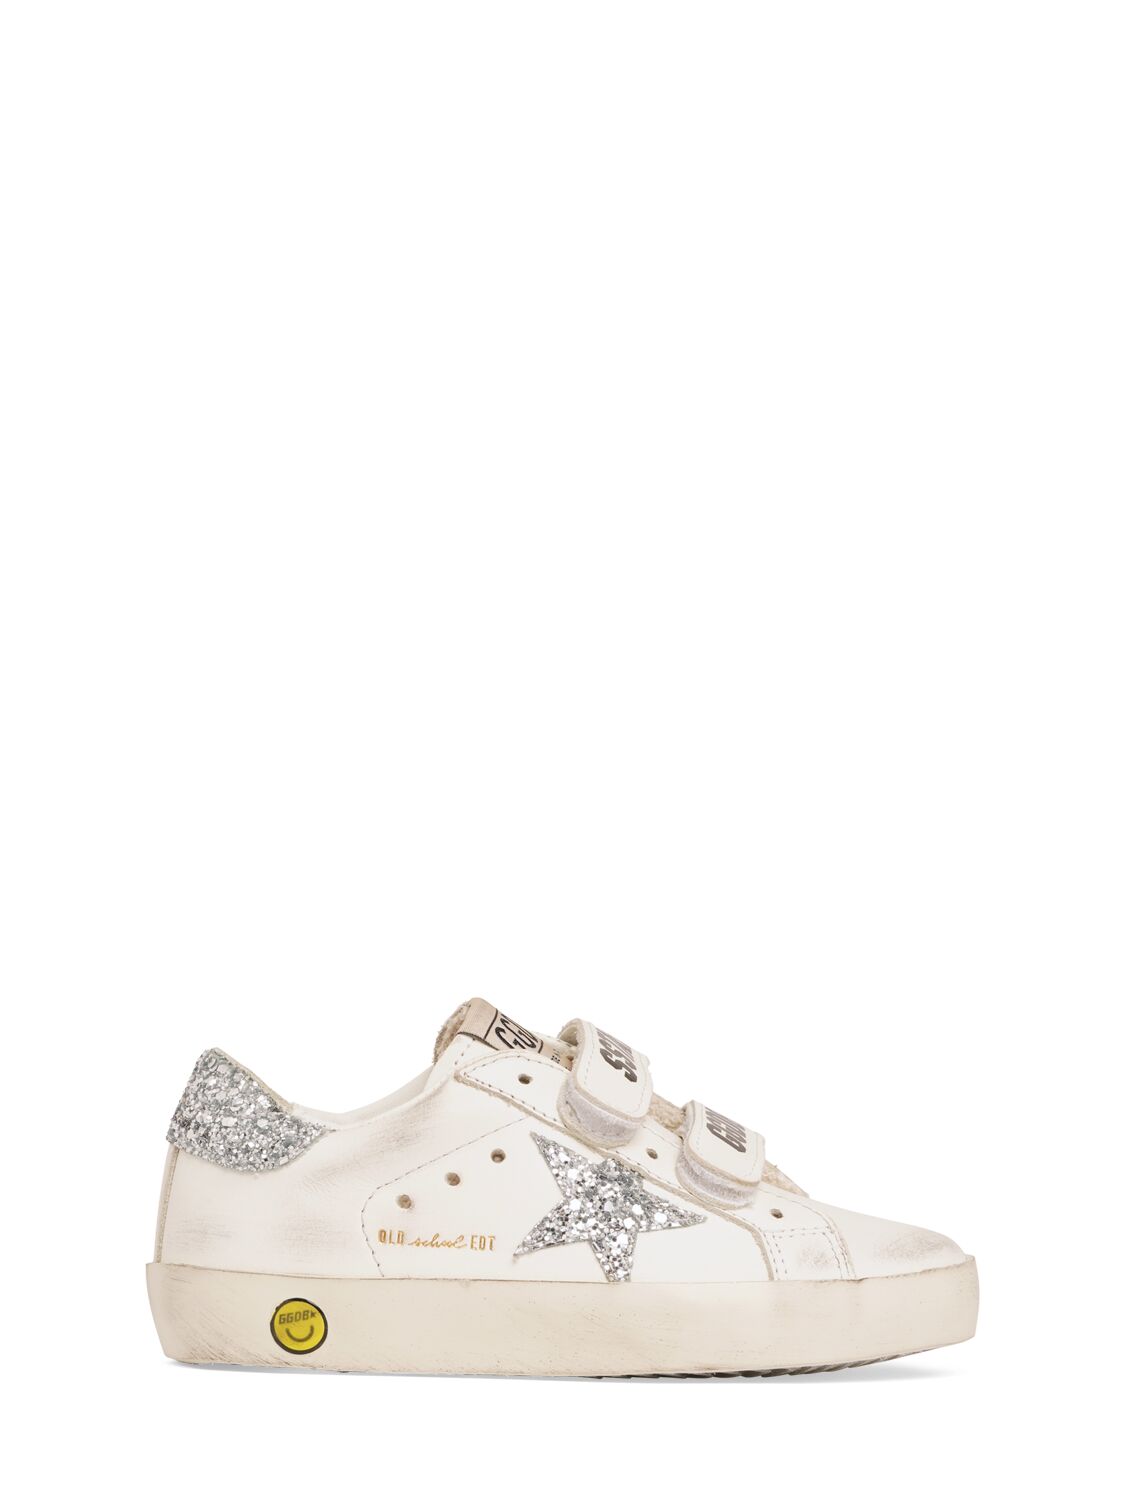 Shop Golden Goose Old School Leather Strap Sneakers In White,silver